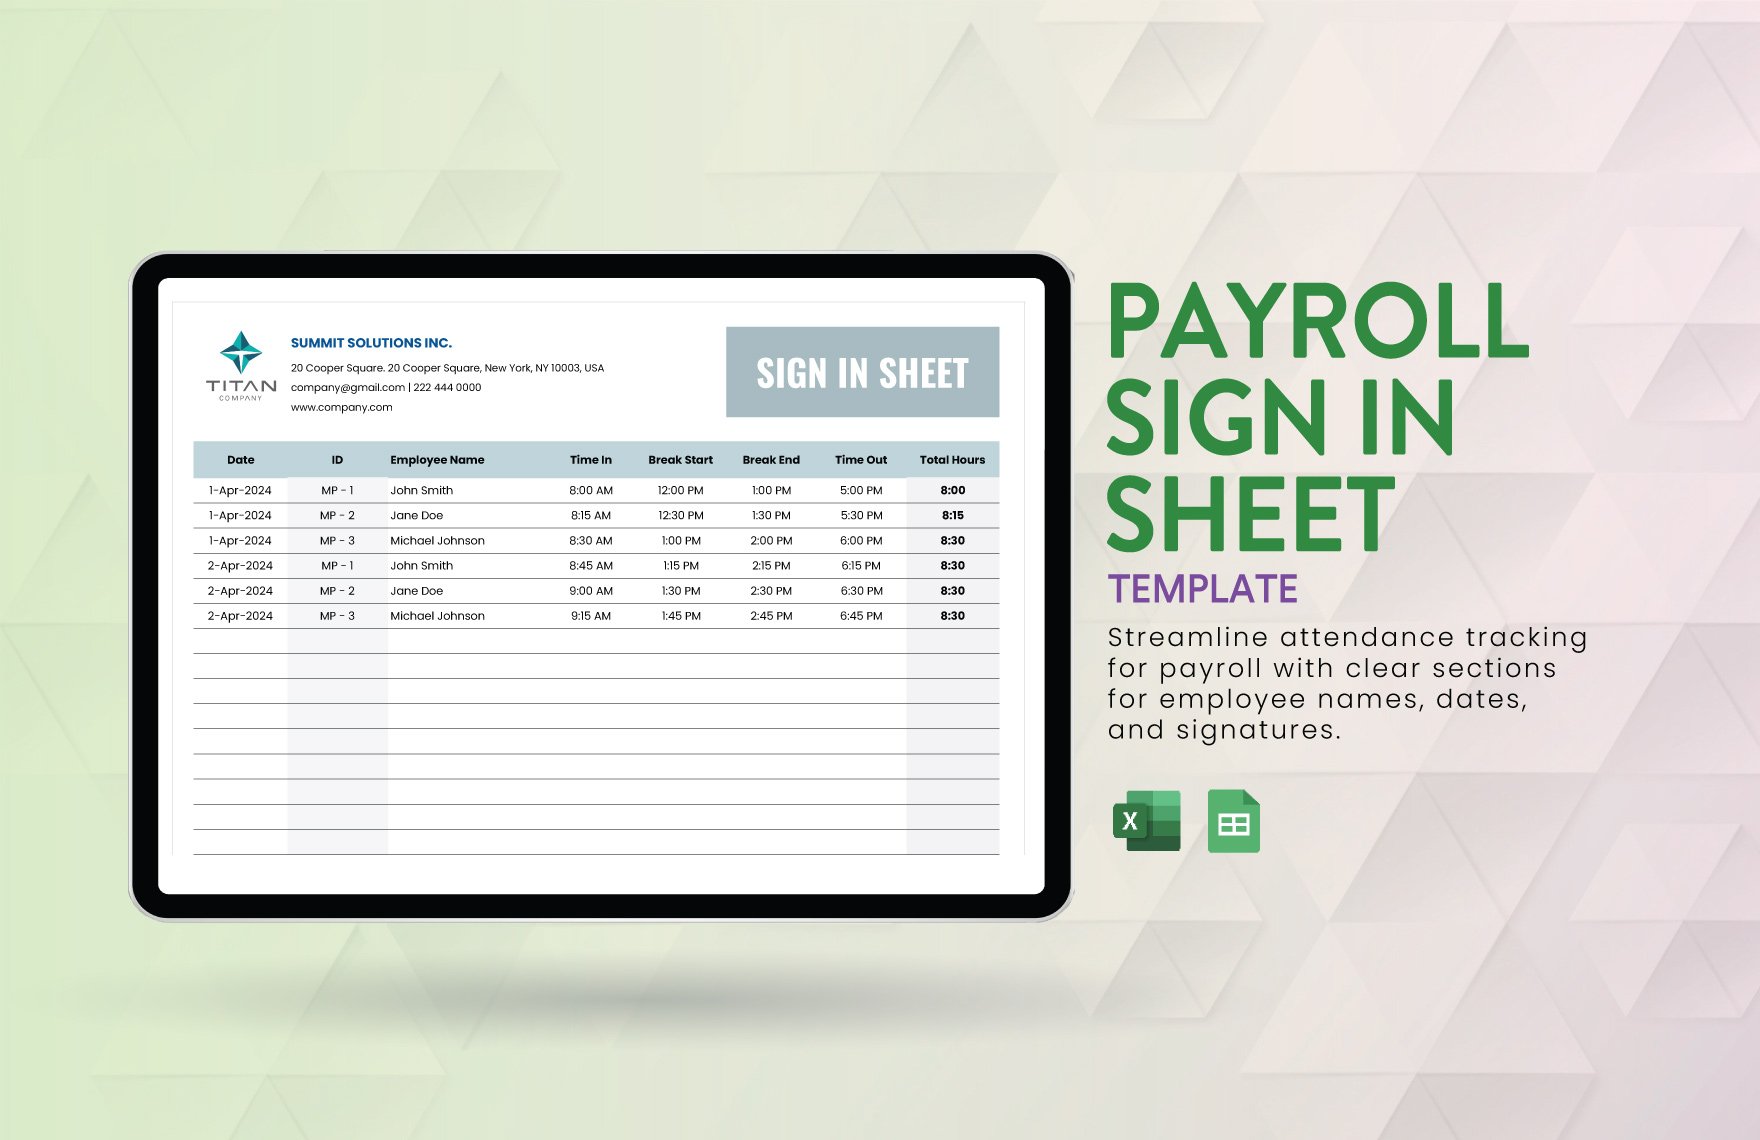 Payroll Sign in Sheet Template in Excel, Google Sheets